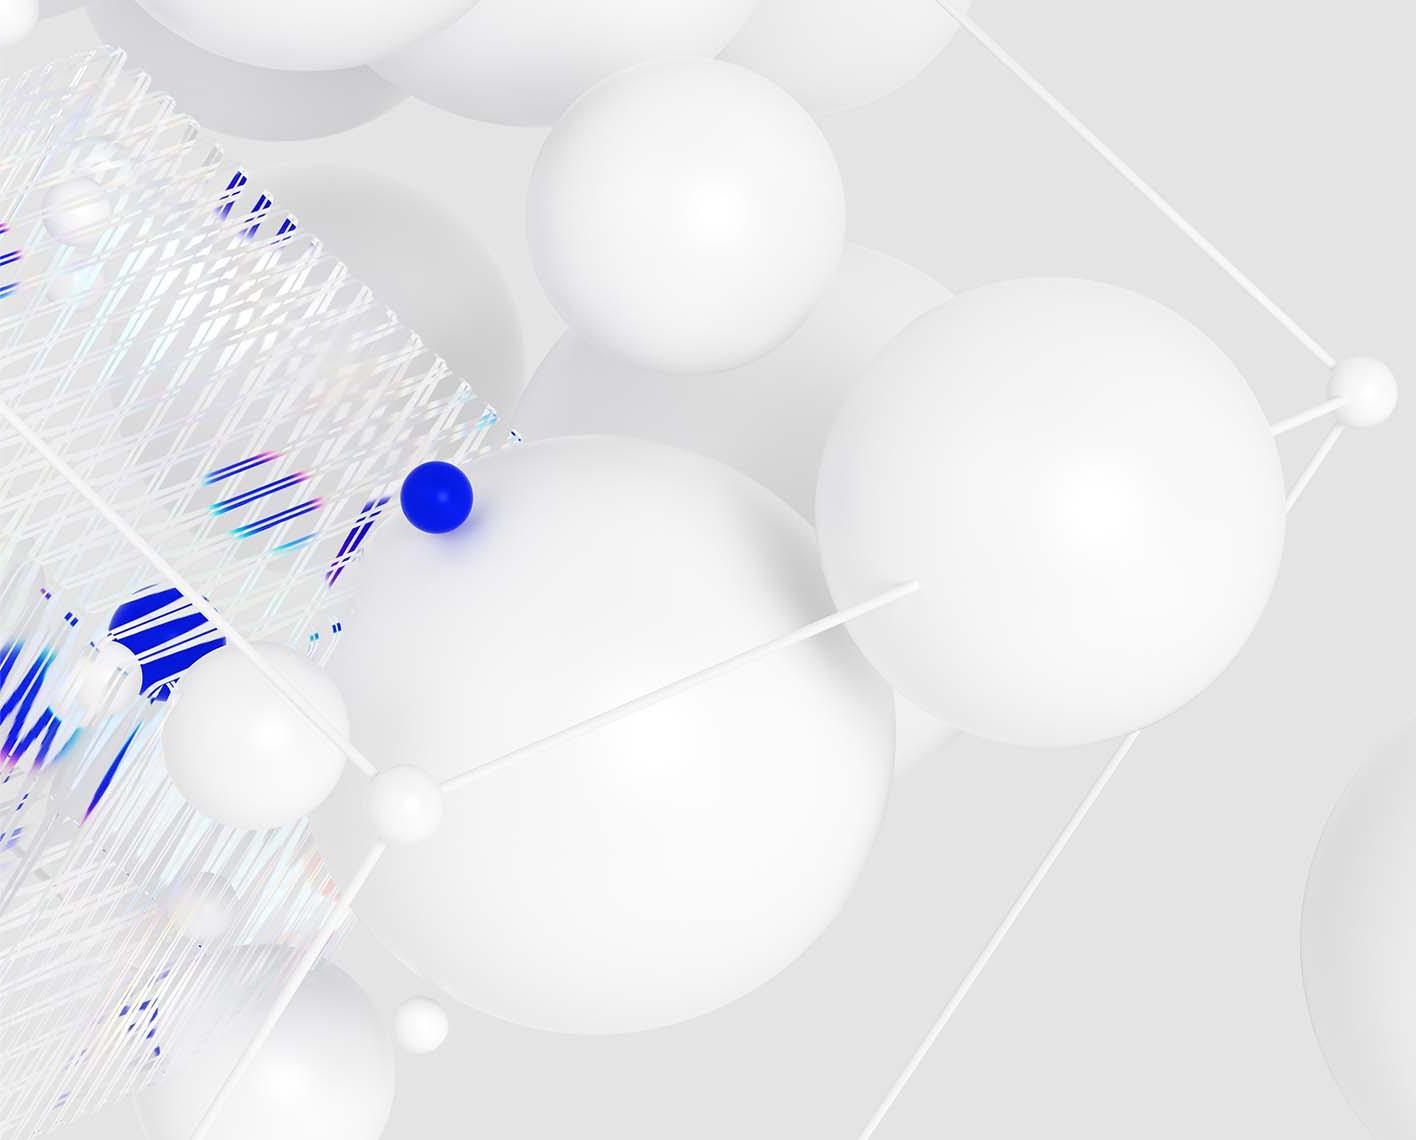 3D CGI image of white and blue spheres on a white background (全国快3信誉最好的老平台_Carbon_Capture_04)